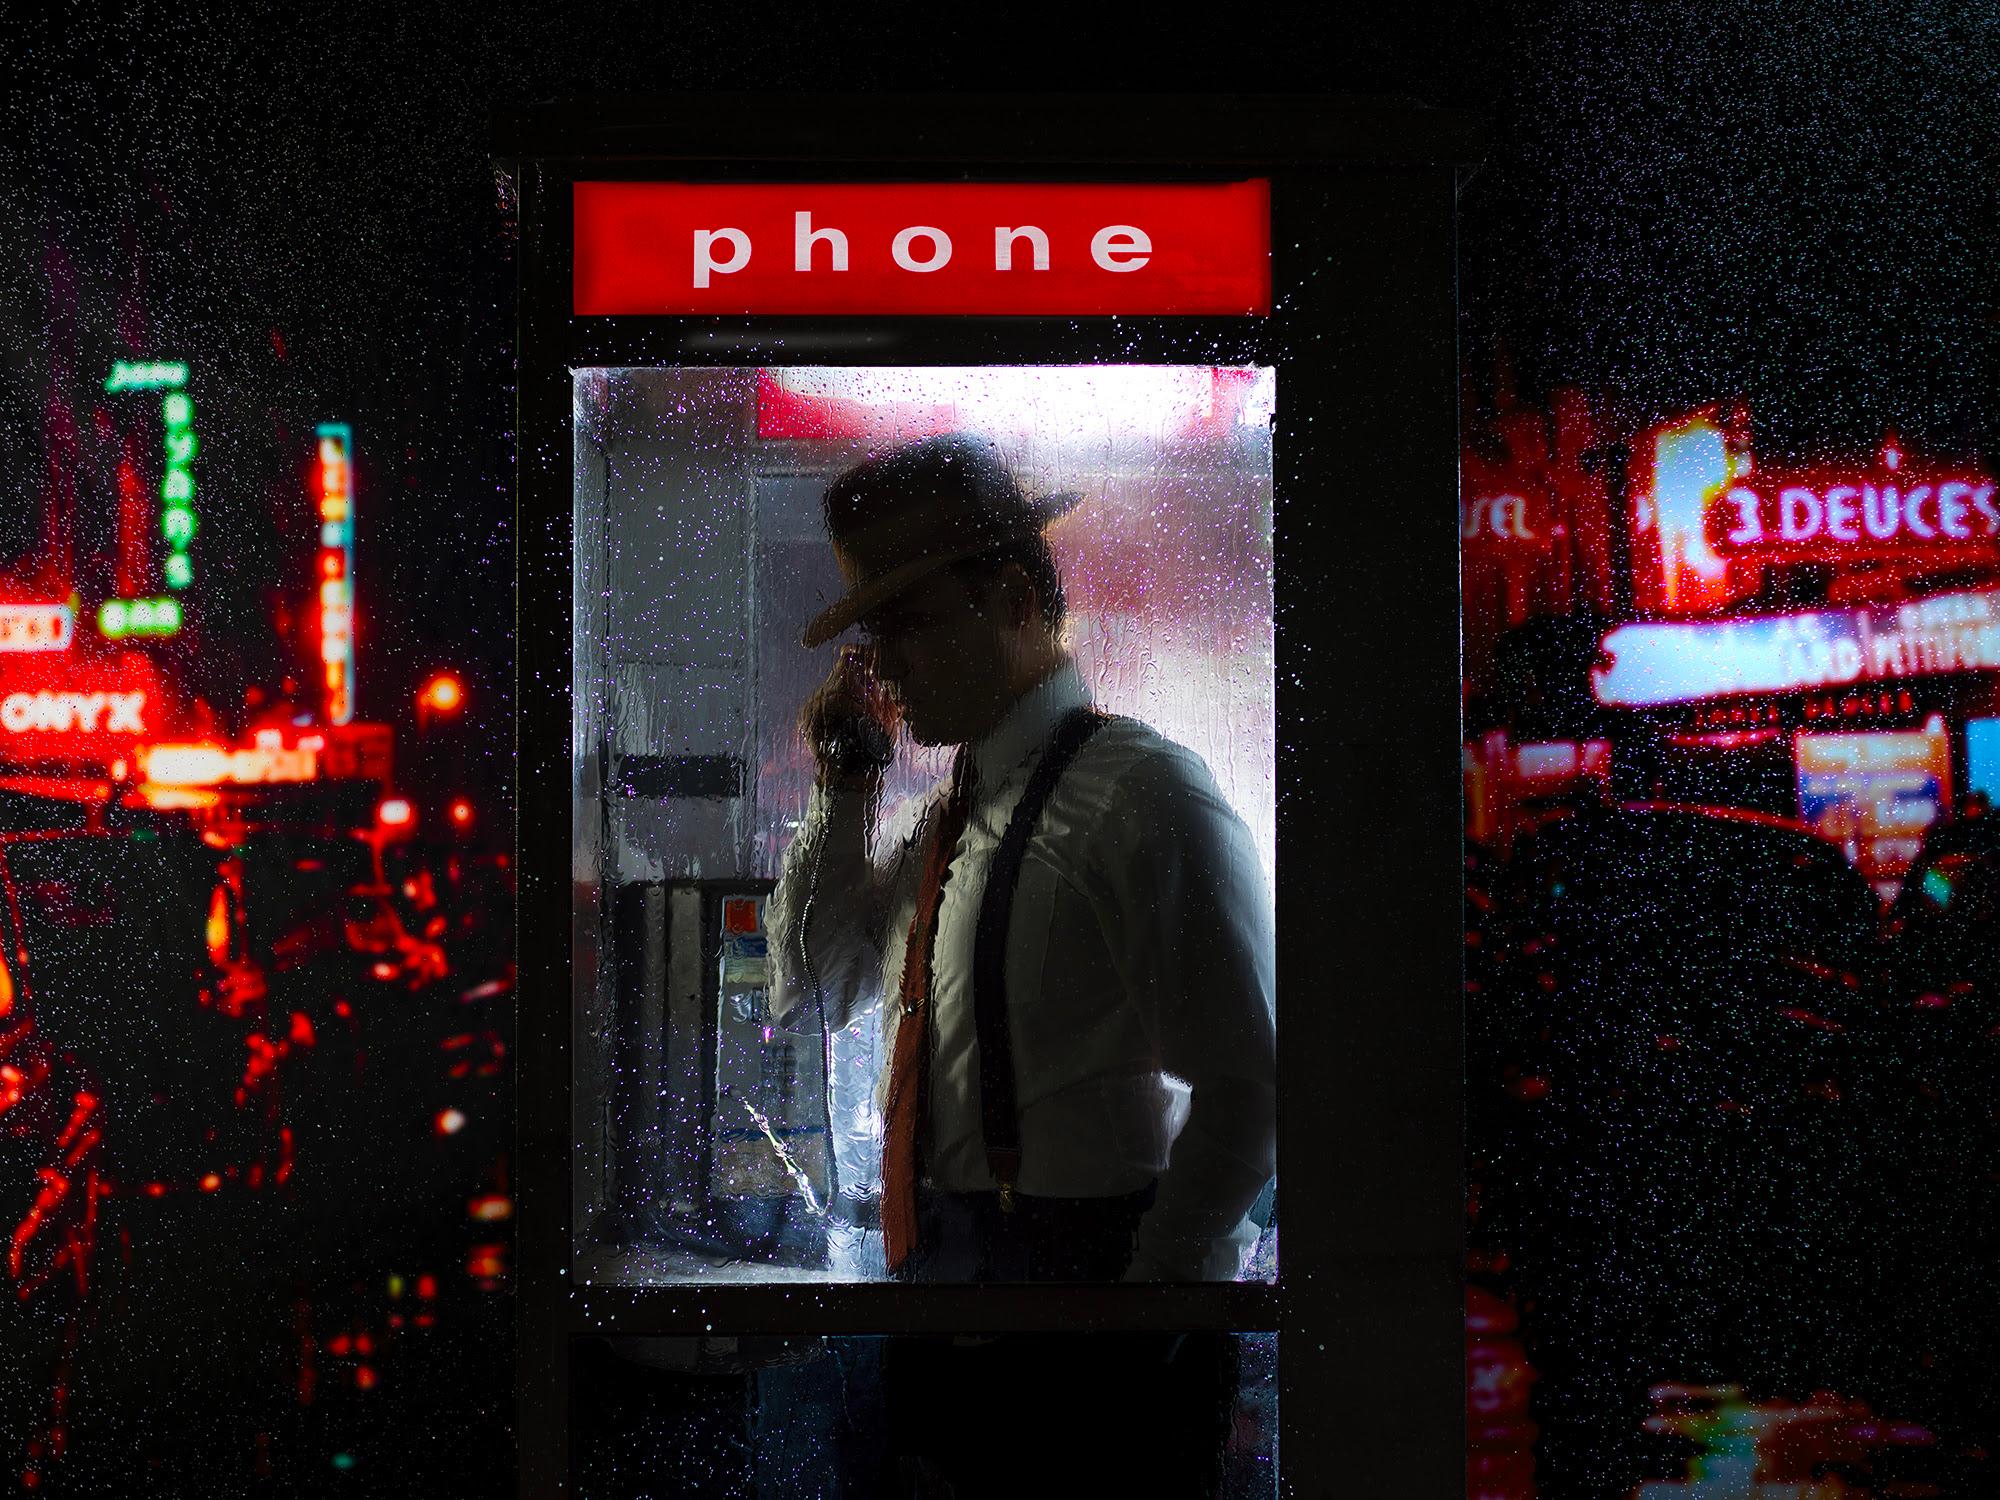 The Man in the Phone Booth (56" x 76")